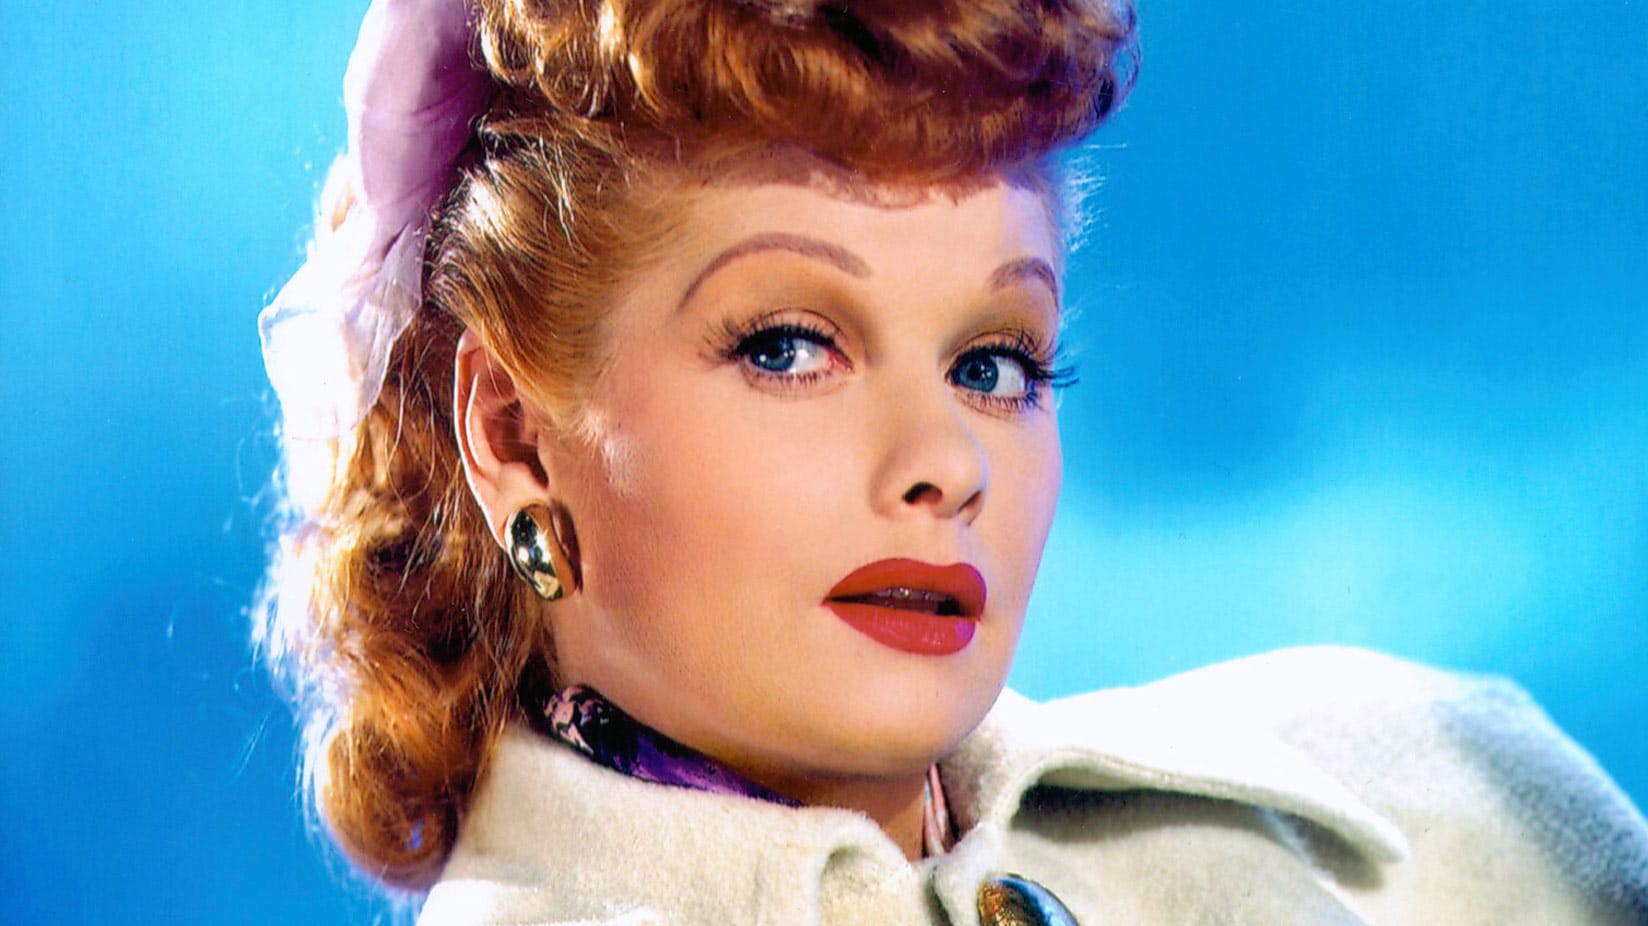 All About Lucille Ball: Height, Weight, Bio, and More